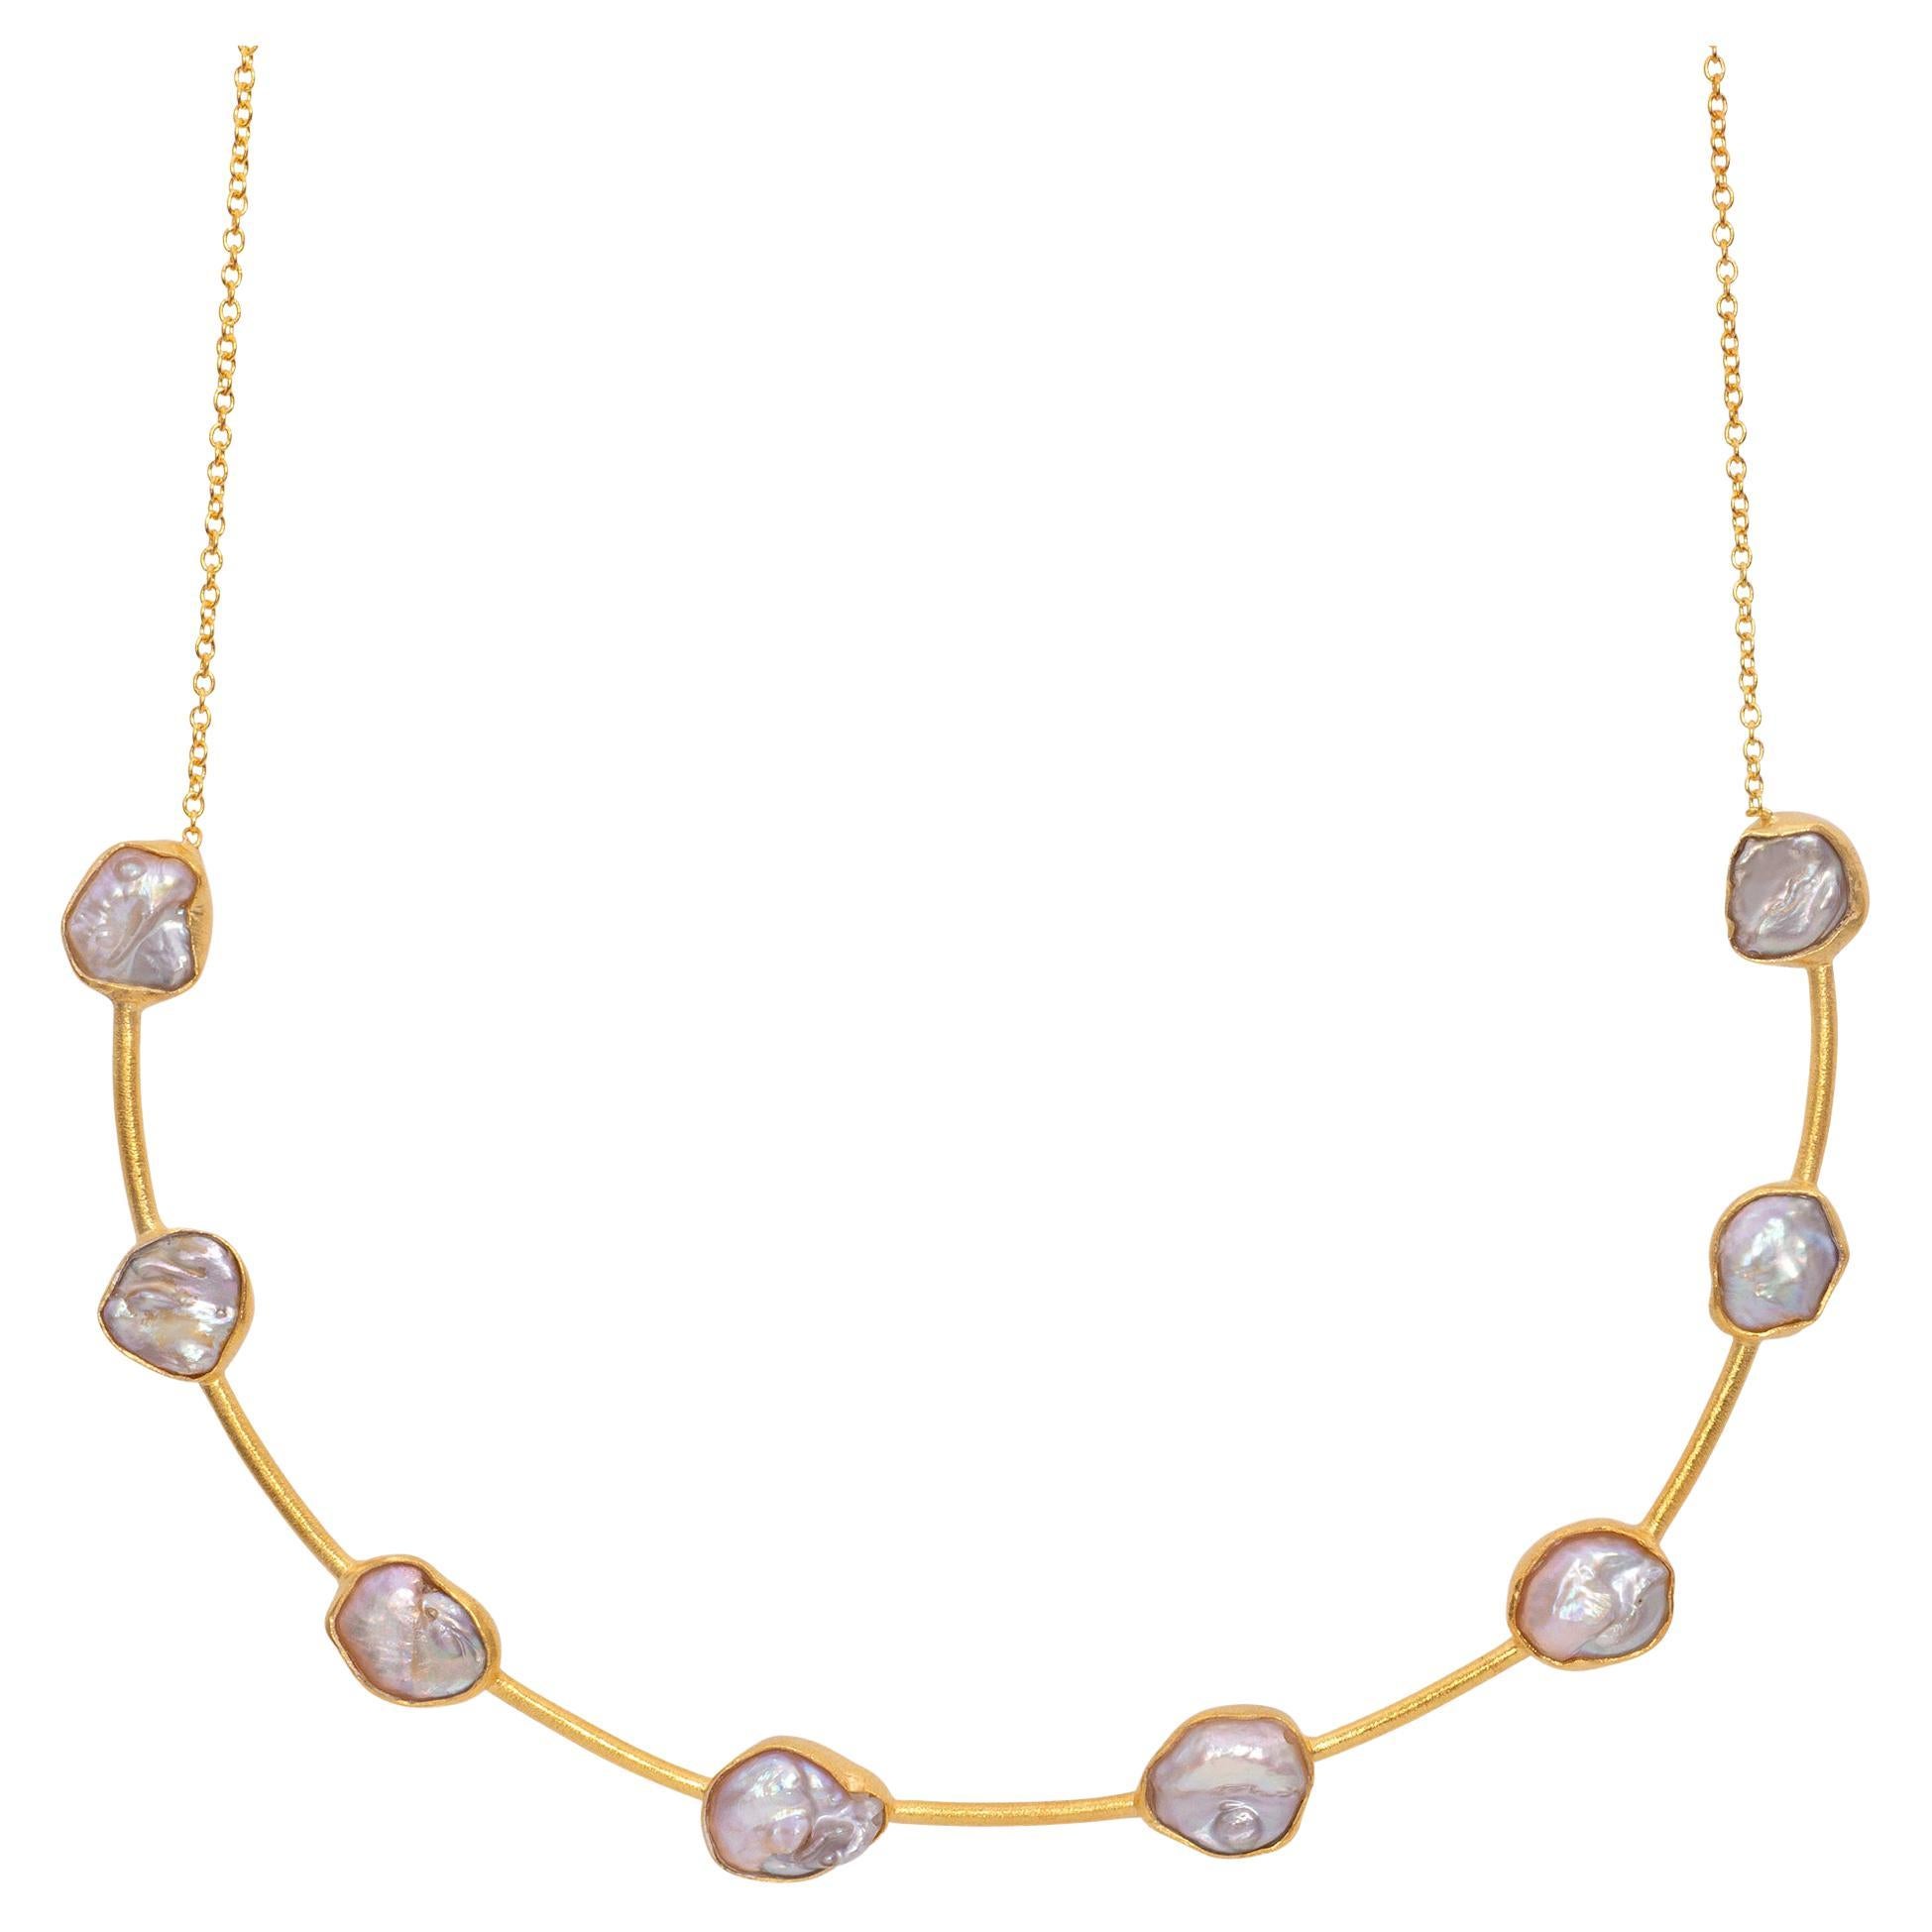 Another unique Merideth McGregor designed item. This April in Paris Designs Gold Vermeil Blue Topaz Choker Necklace is an elegant piece to enhance your wardrobe. The necklace measure just under 5 inches across and is adorned with eight magnificent